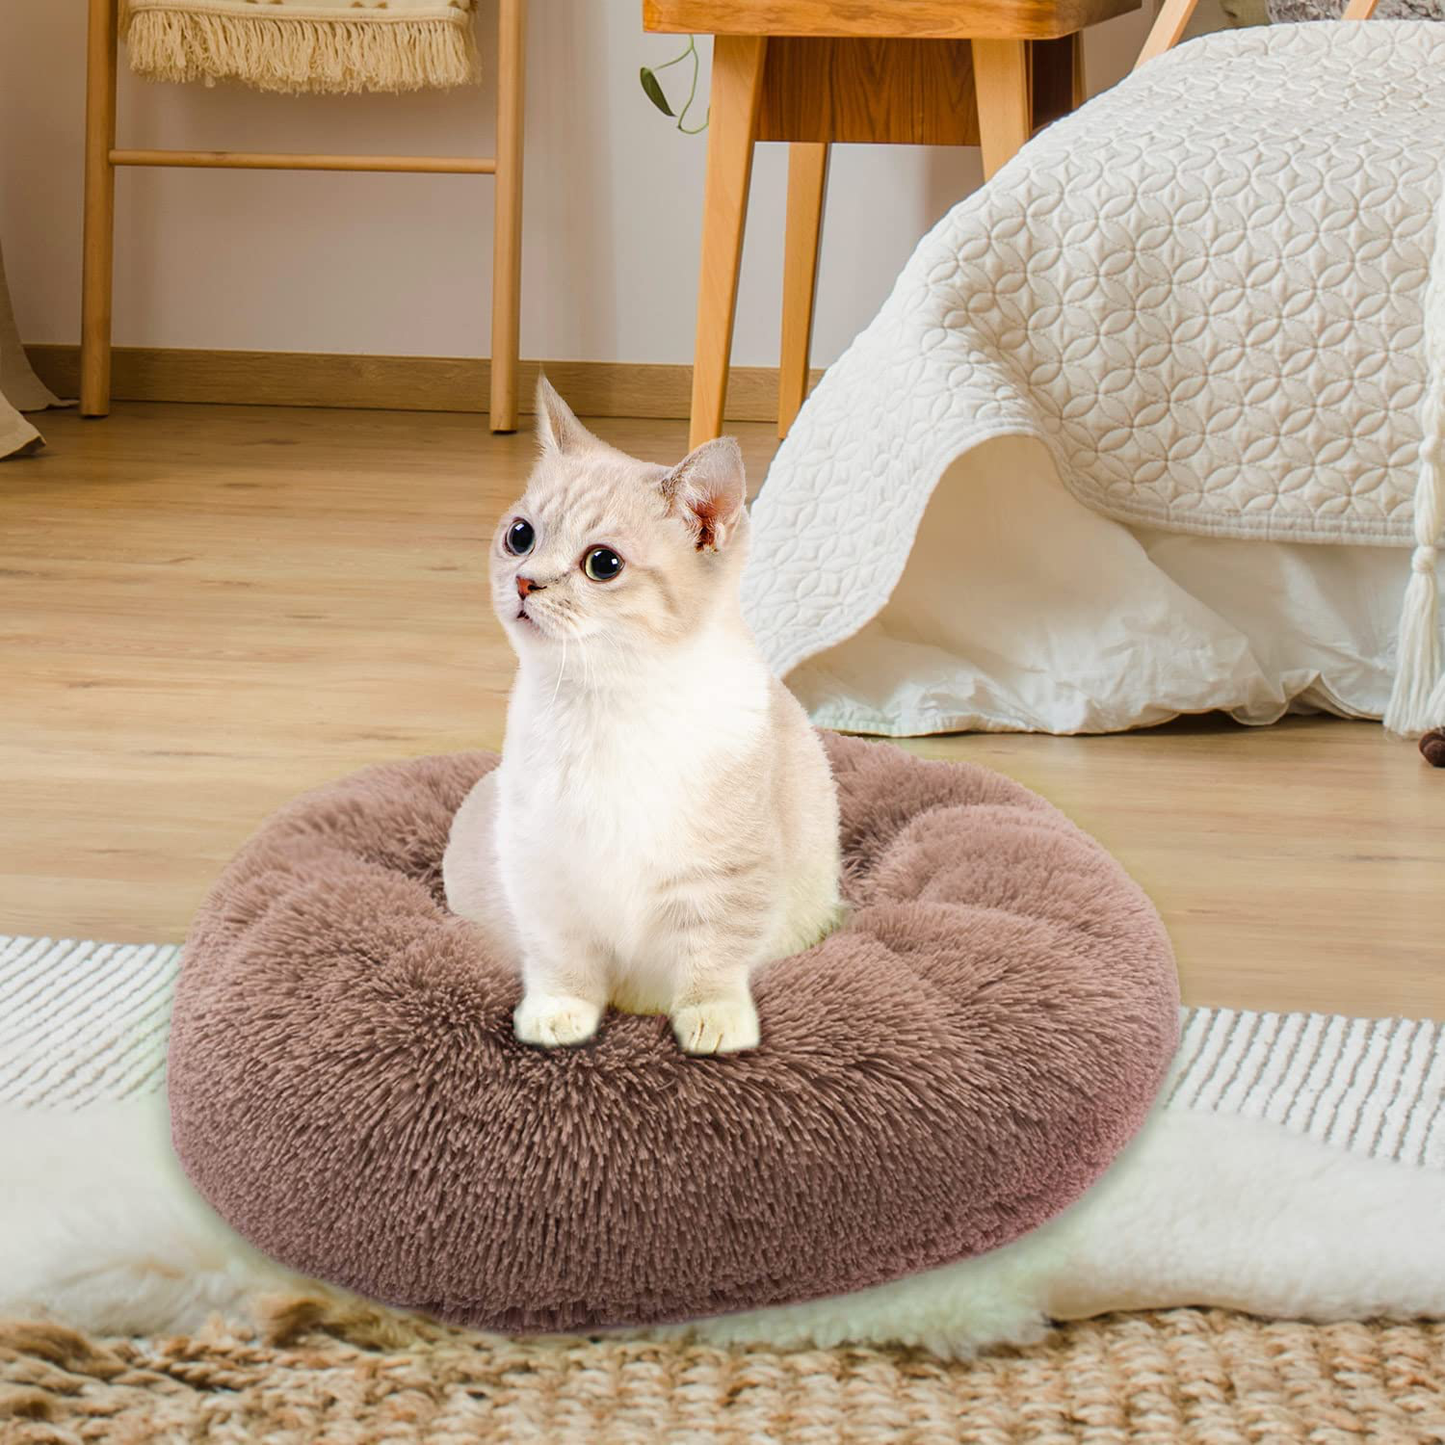 Calming Dog Bed Donut Cuddler - Faux Fur round Comfortable Pet Bed for Small Medium Large Dogs Calming Dog Bed Indoor Sleeping Cat Bed with Machine Washable Waterproof Bottom Fluffy Dog Cushion Bed